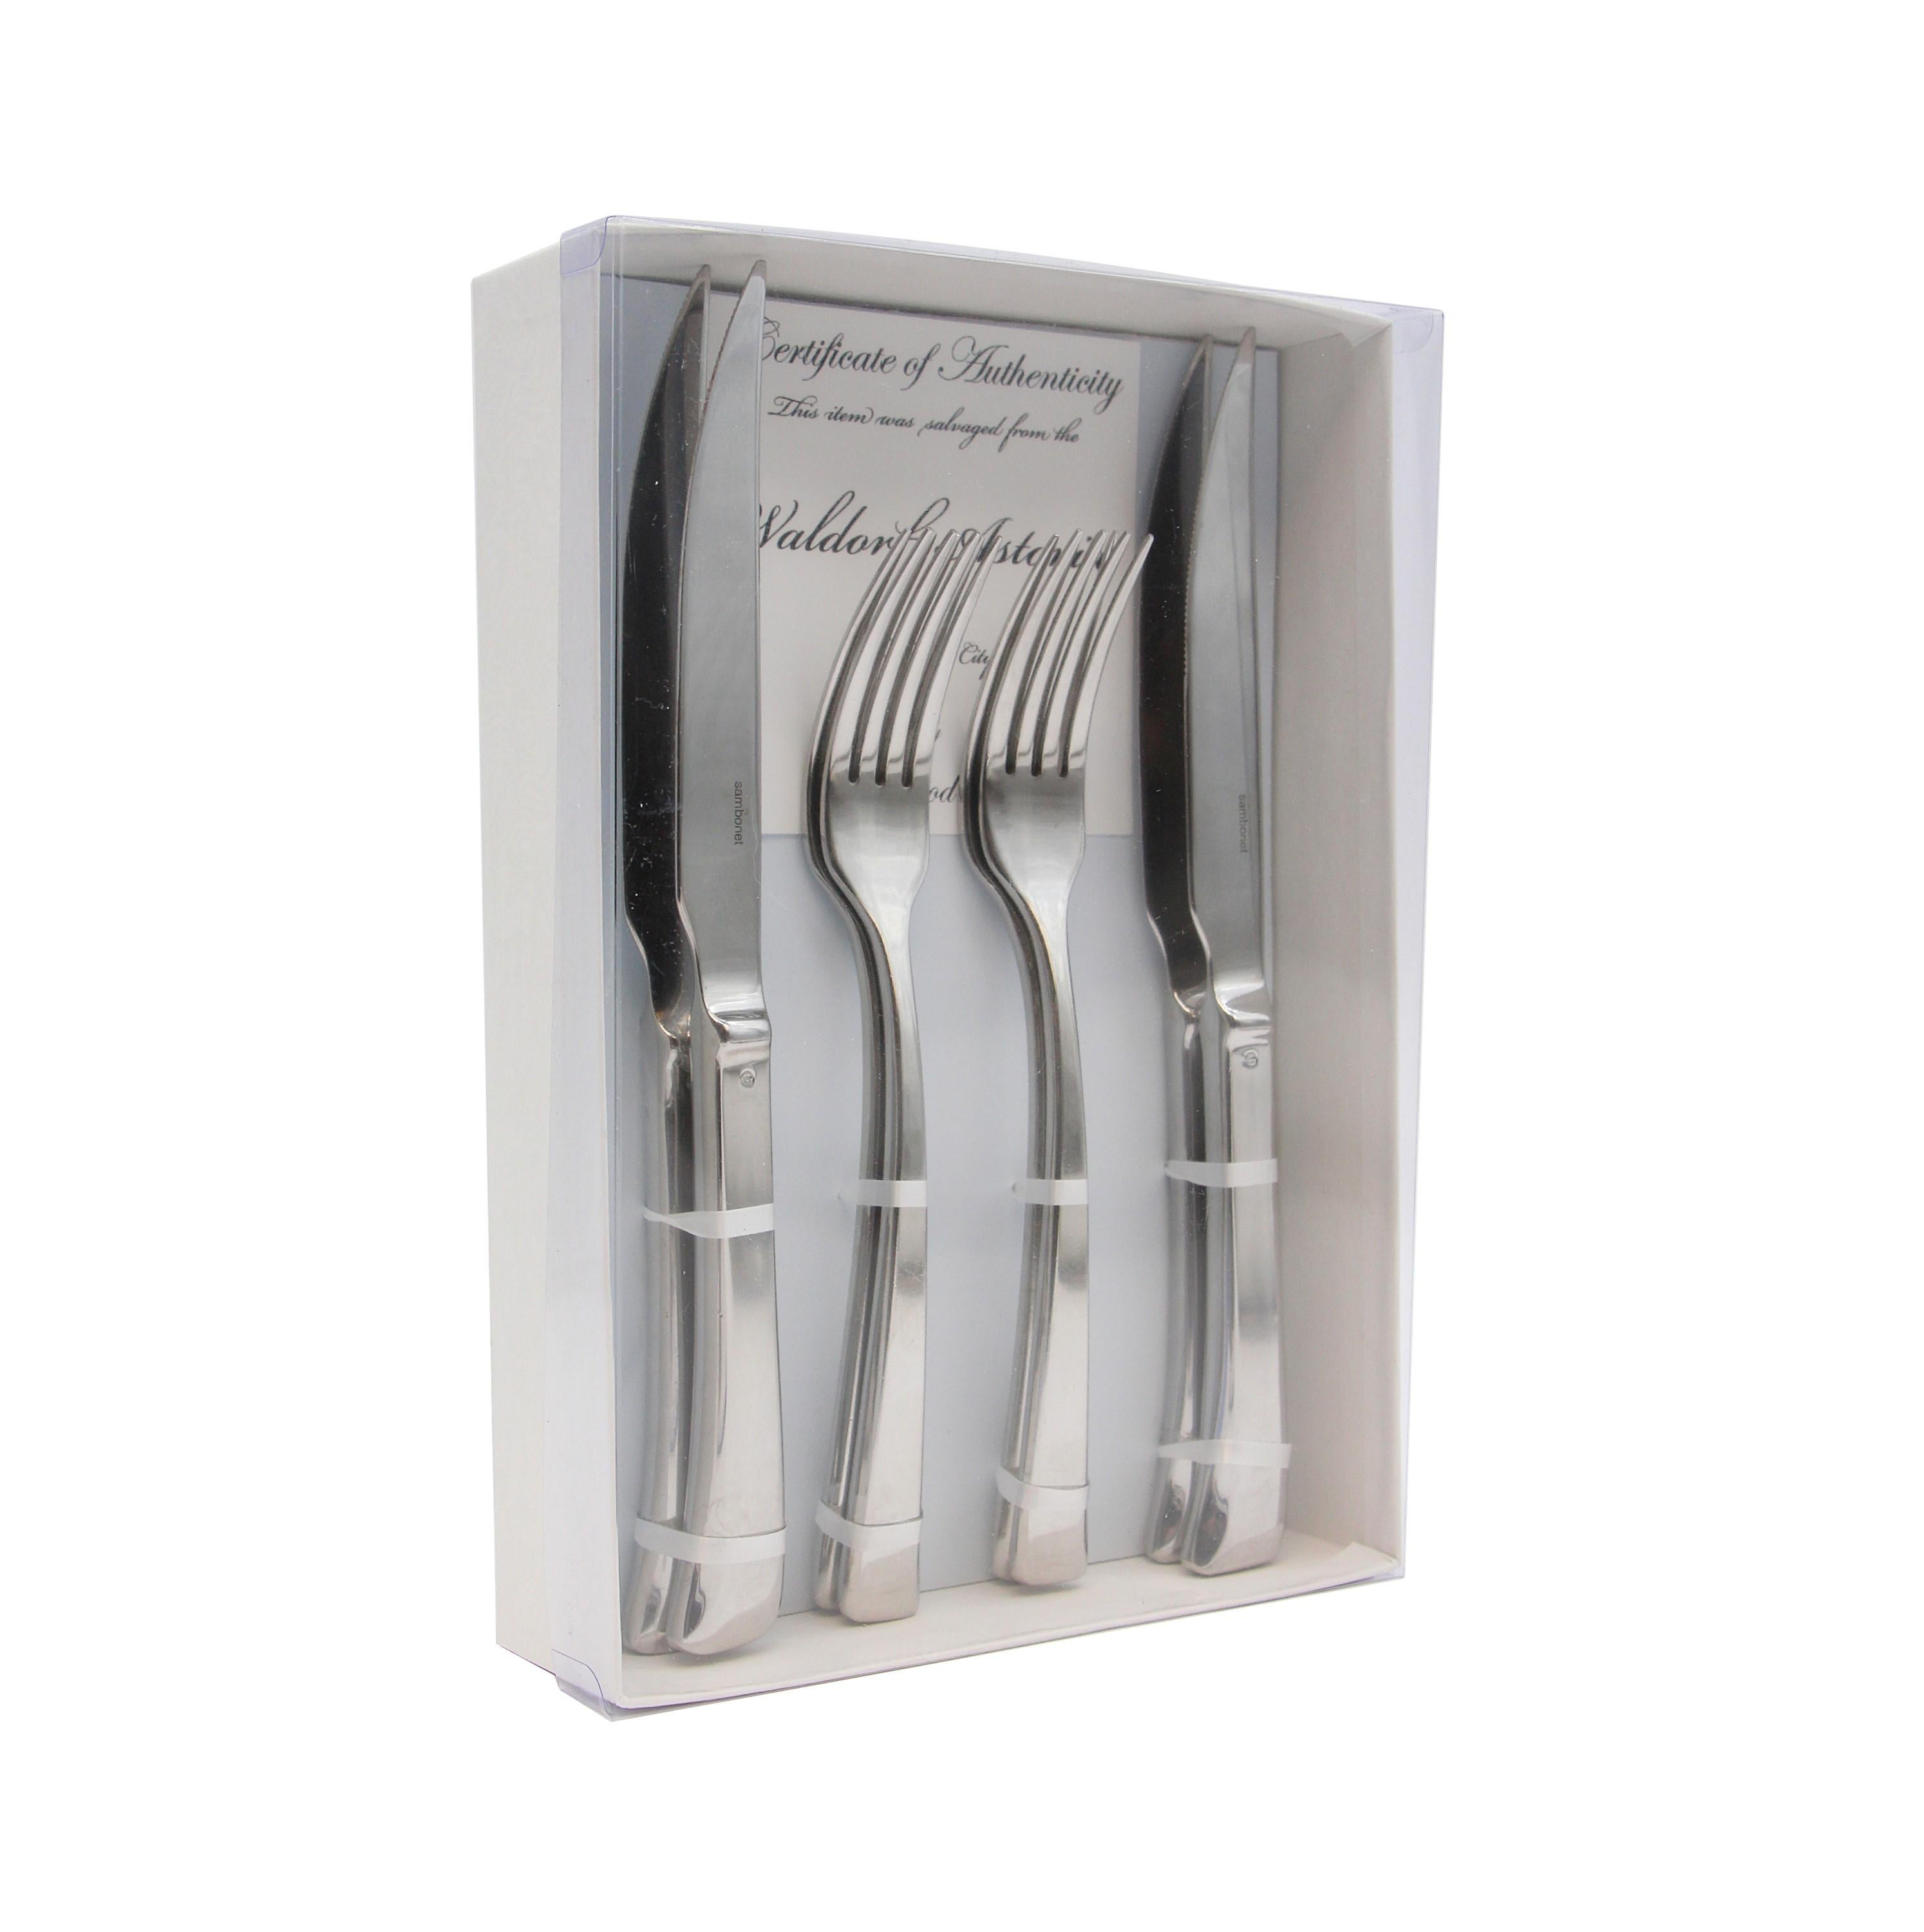 High quality stainless steel used dinner knife and dinner fork flatware gift set. Made by Sambonet in their Imagine style. These pieces were used in the La Chin restaurant of the Waldorf Astoria Hotel on Park Ave in NYC. This set includes a Waldorf